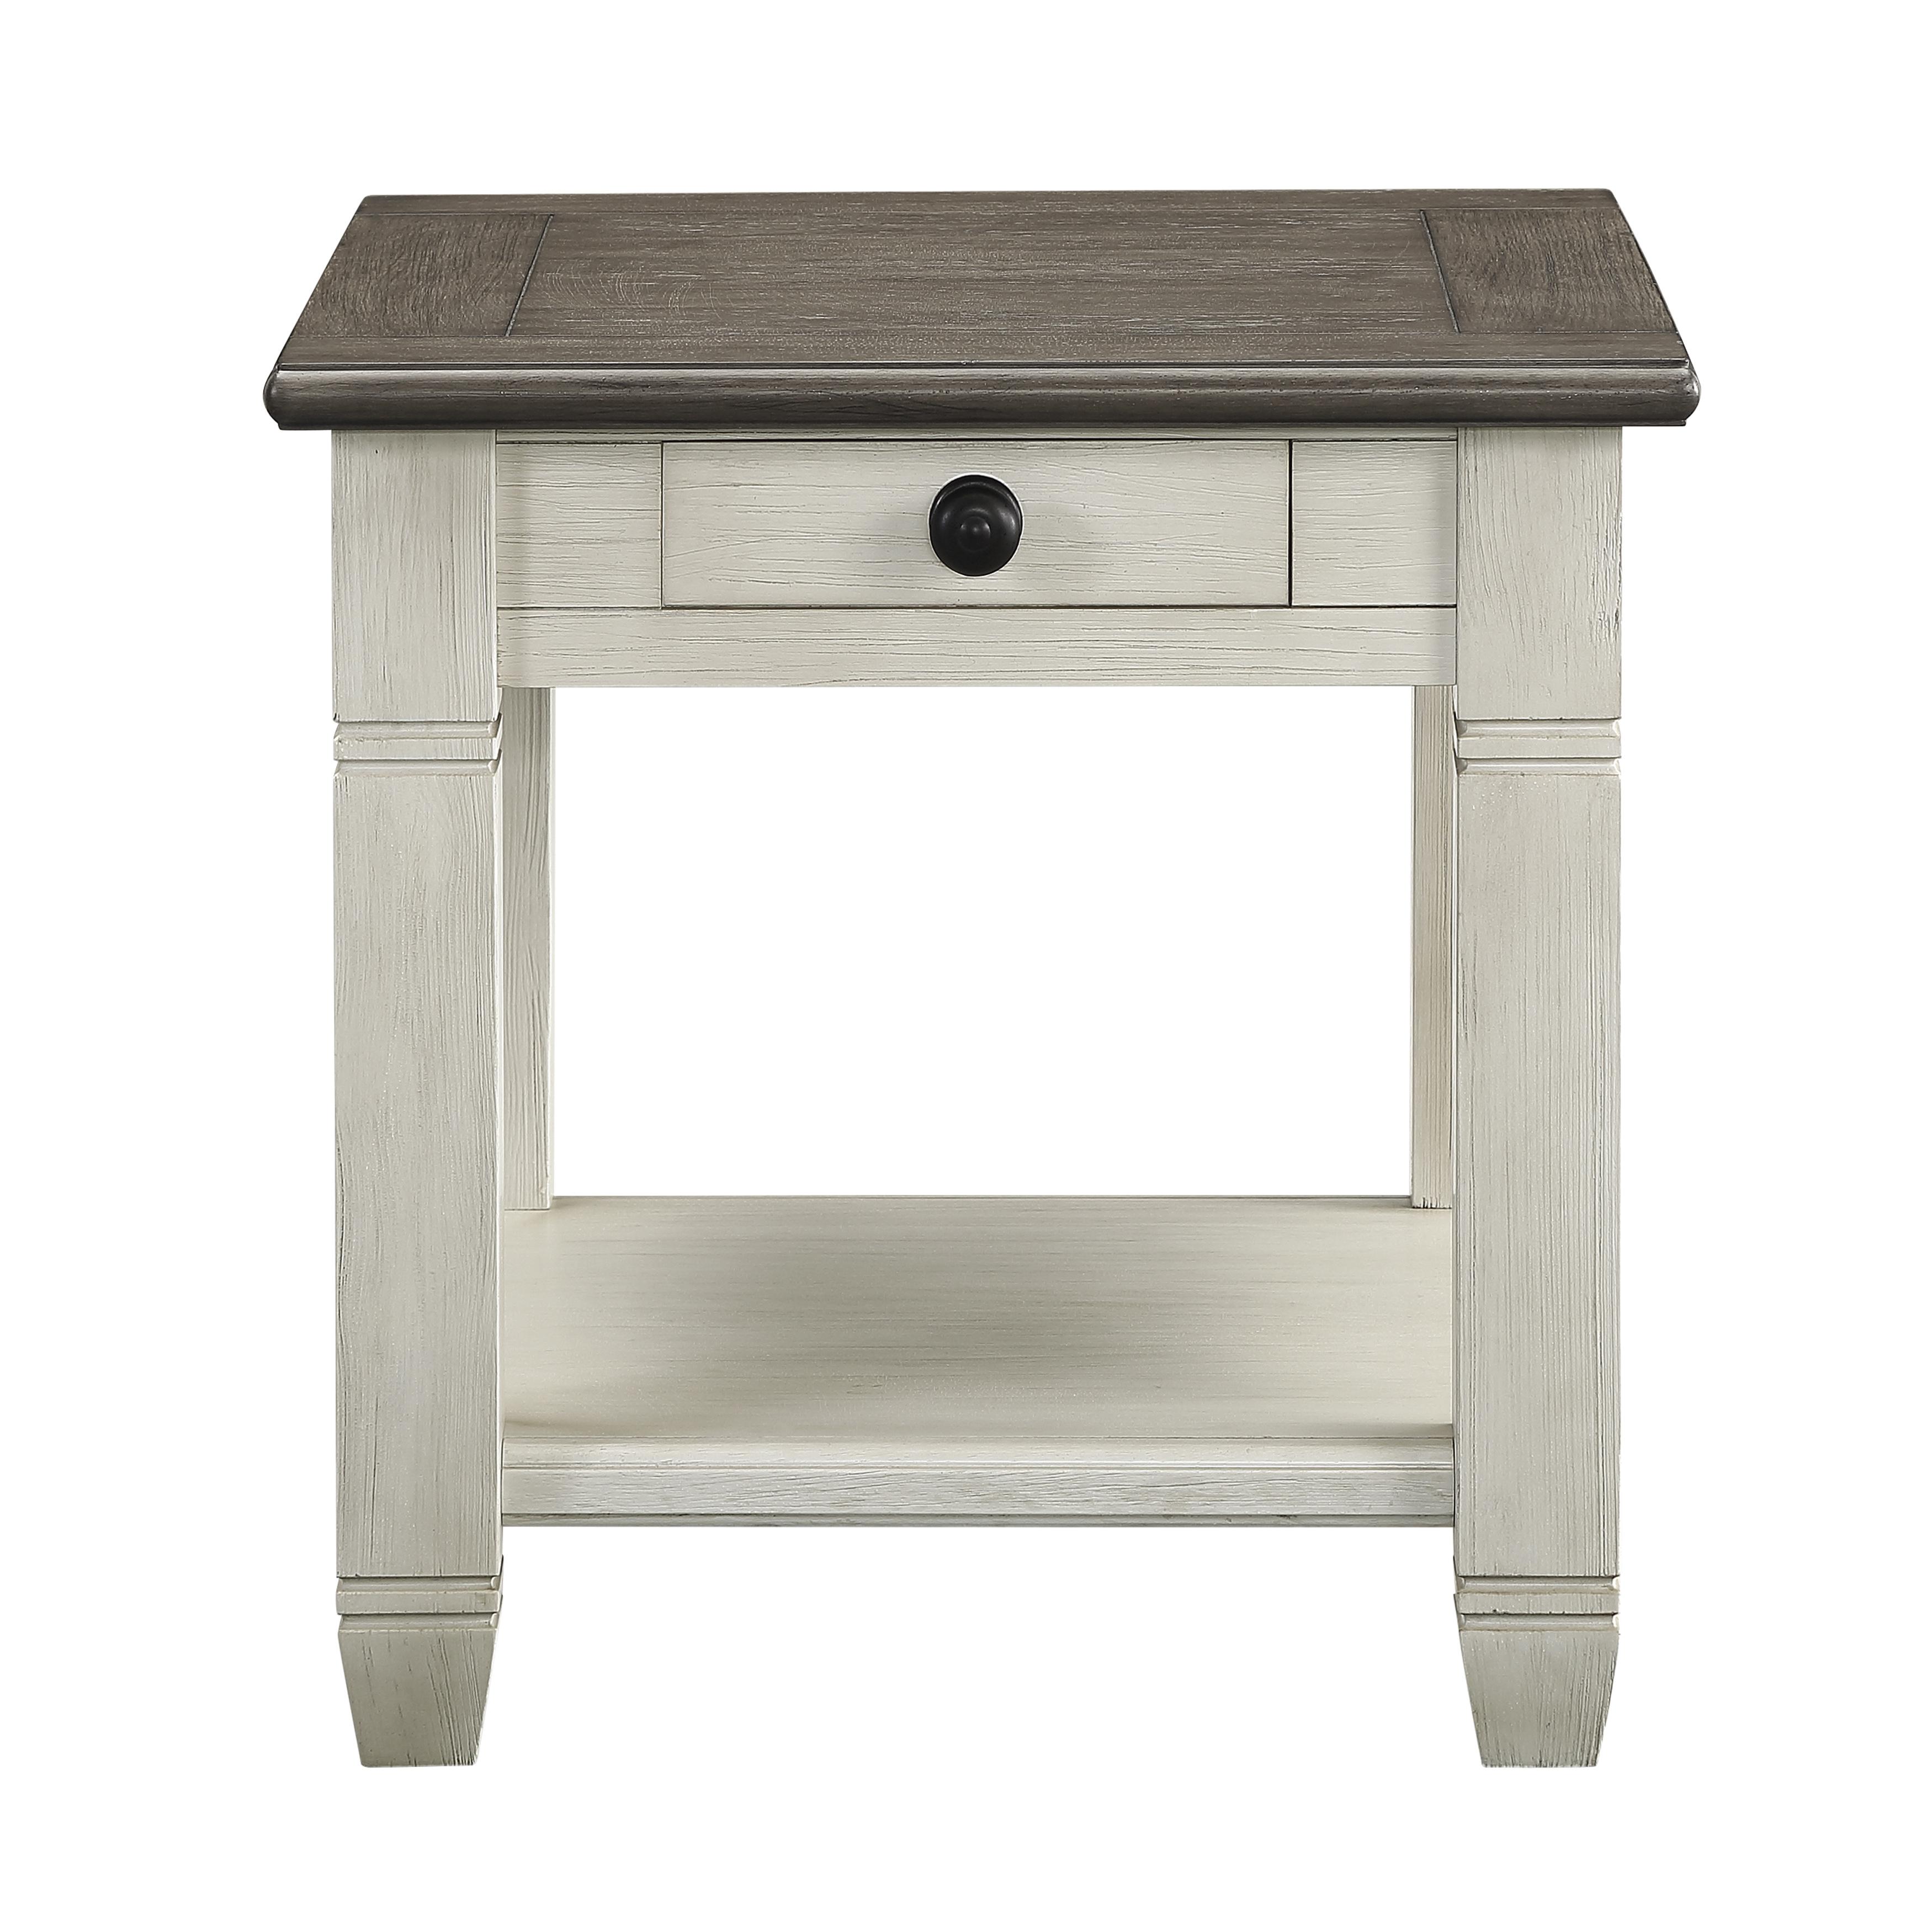 Cottage End Table 5627NW-04 Granby 5627NW-04 in Antique White, Brown 